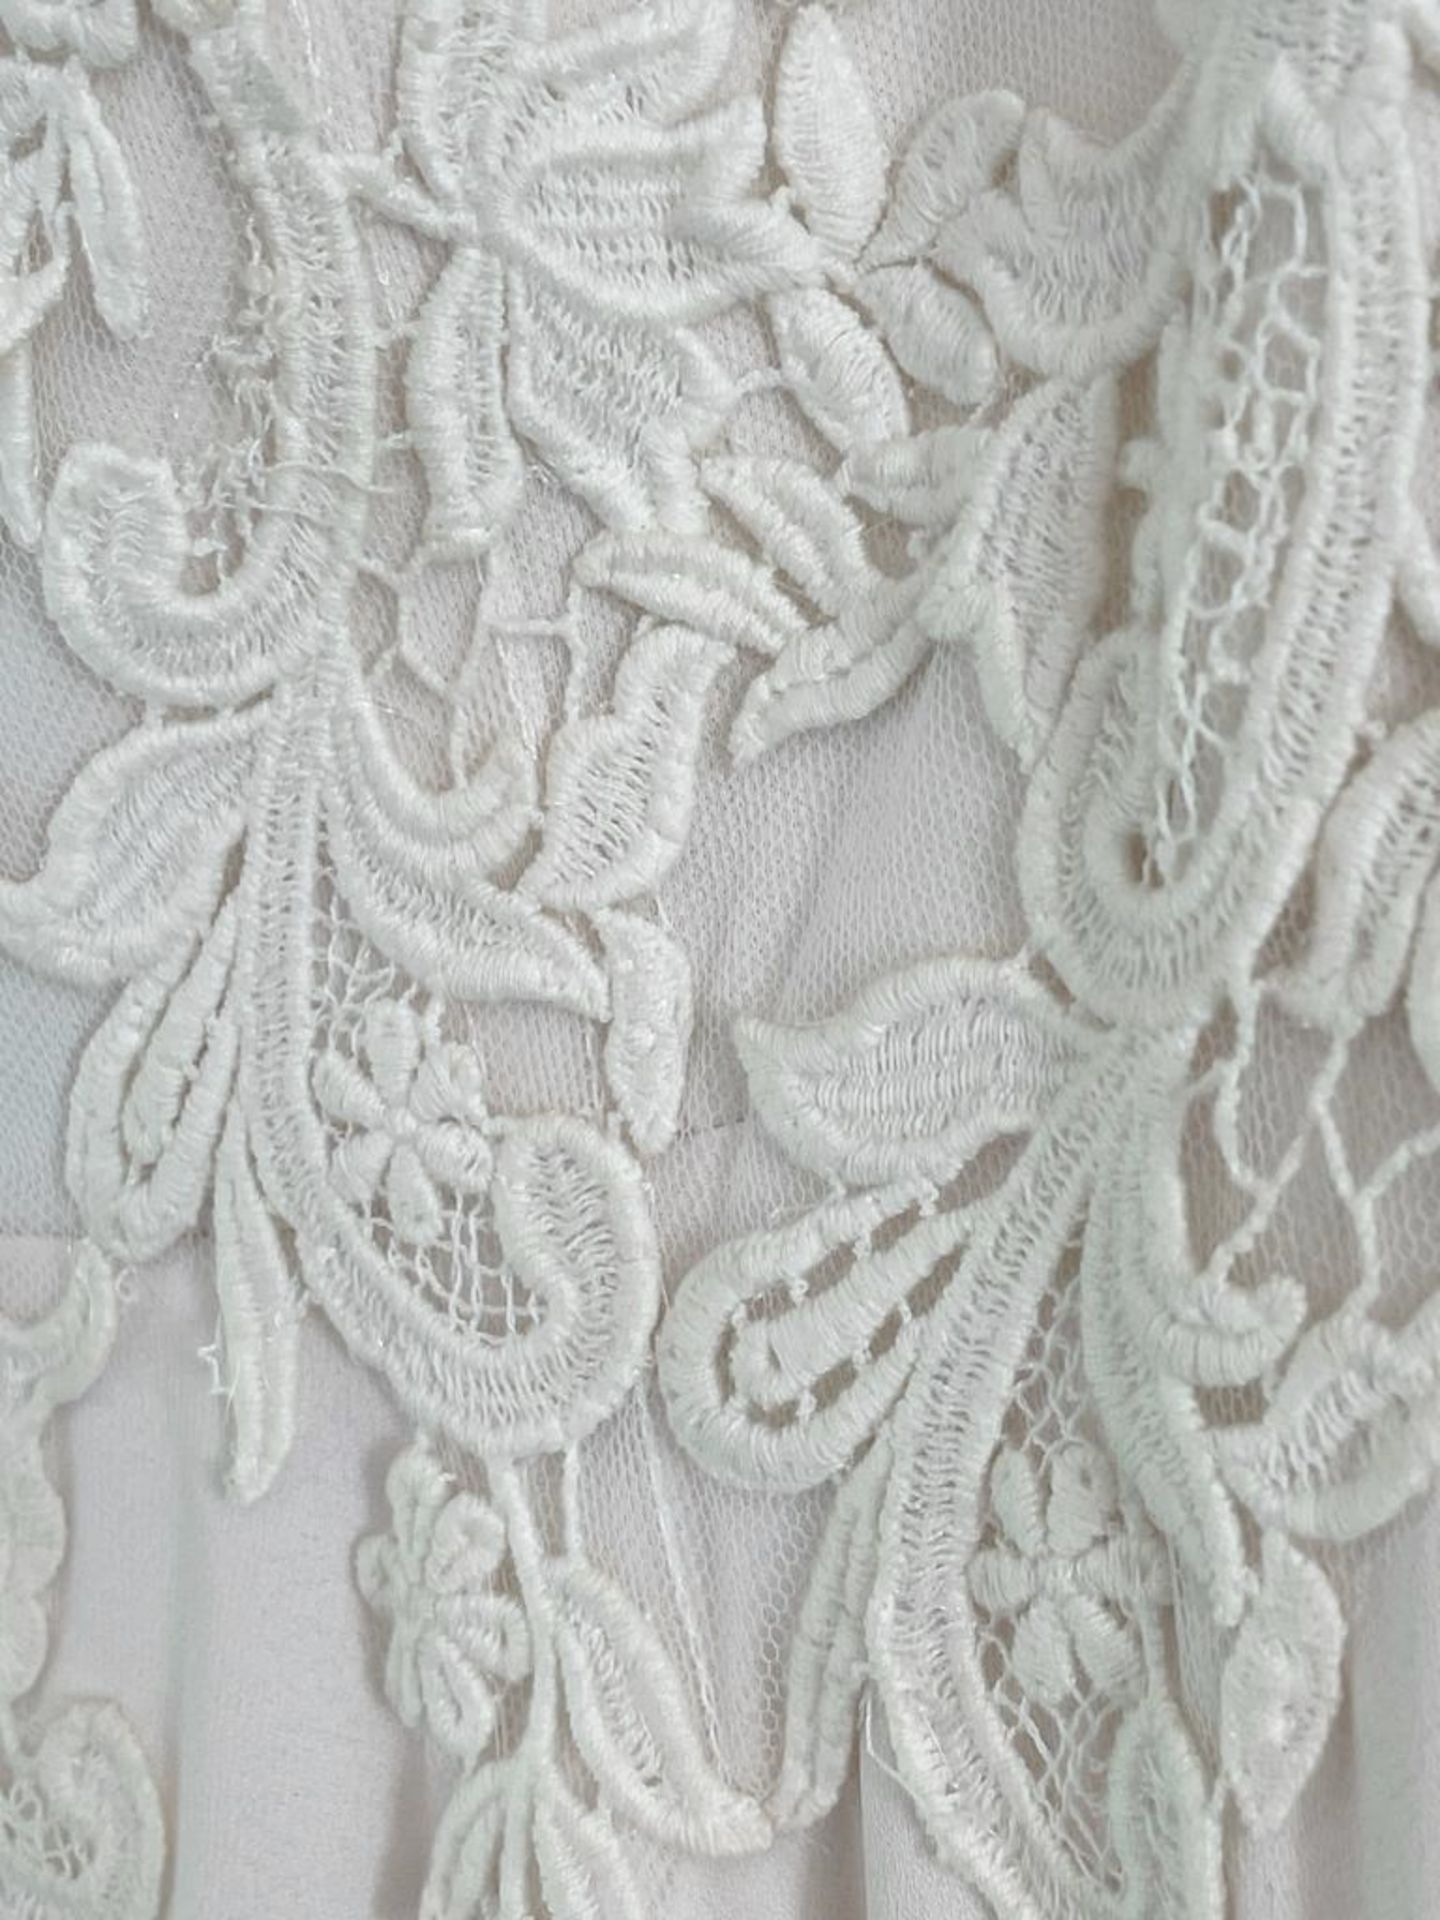 1 x LILIAN WEST 'Kate' Designer Crochet Lace Sweetheart Wedding Dress Bridal Gown, With Silk Flowing - Image 6 of 14